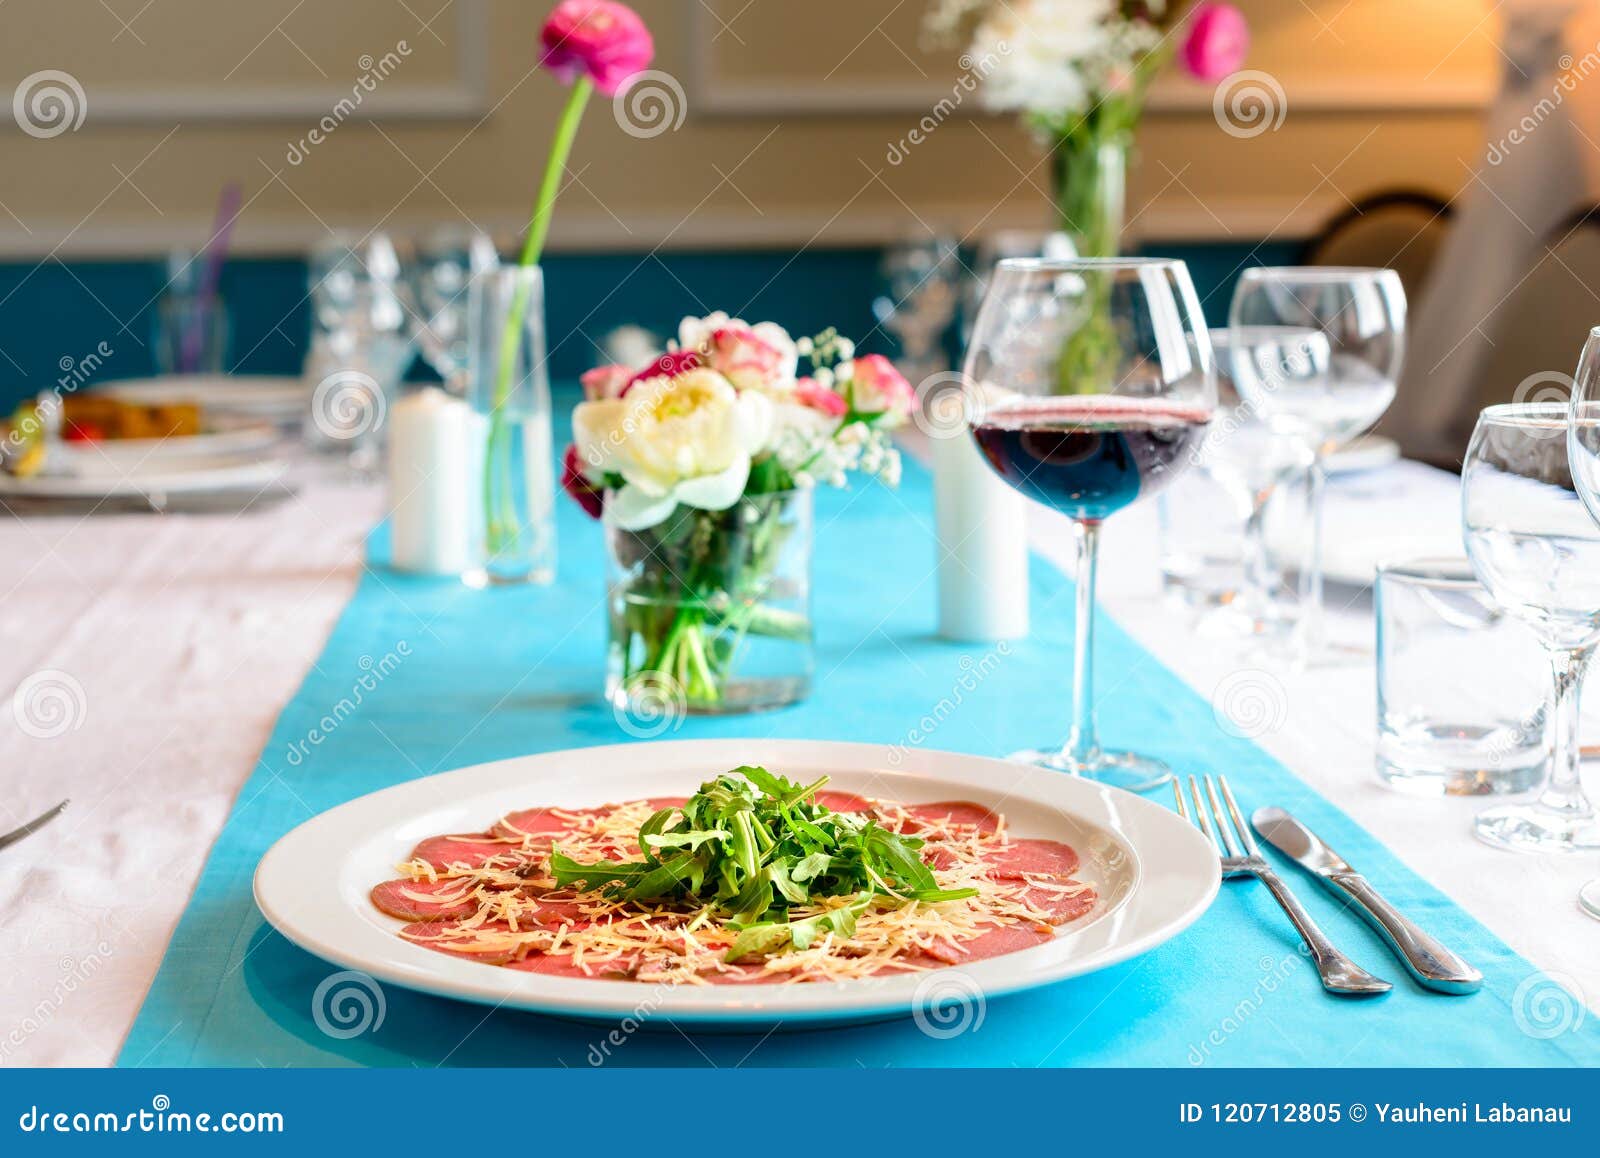 carpaccio on the table in the restaurant